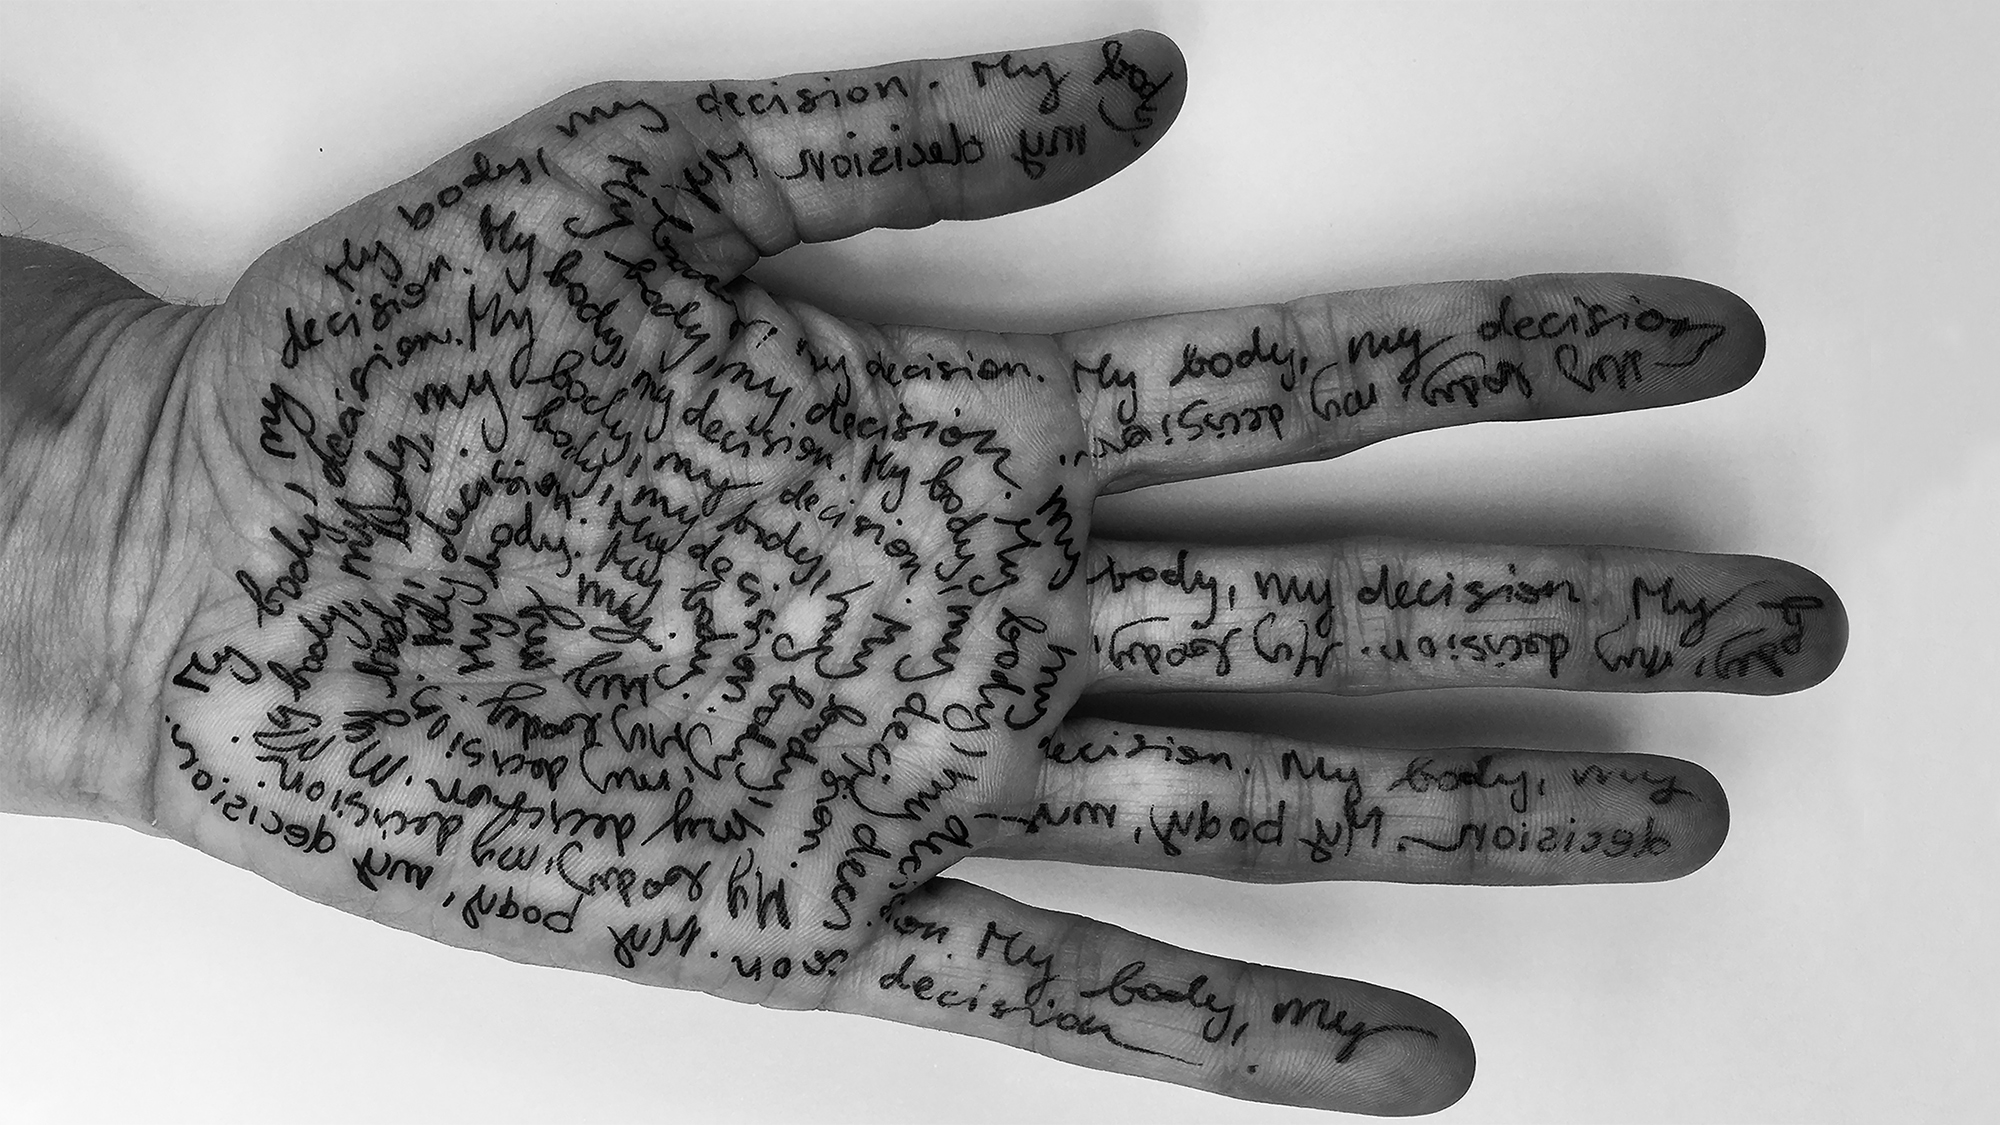 A black-and-white photograph shows the palm of a hand with small letters written on it, repeatedly stating the phrase “My body, my decision.”